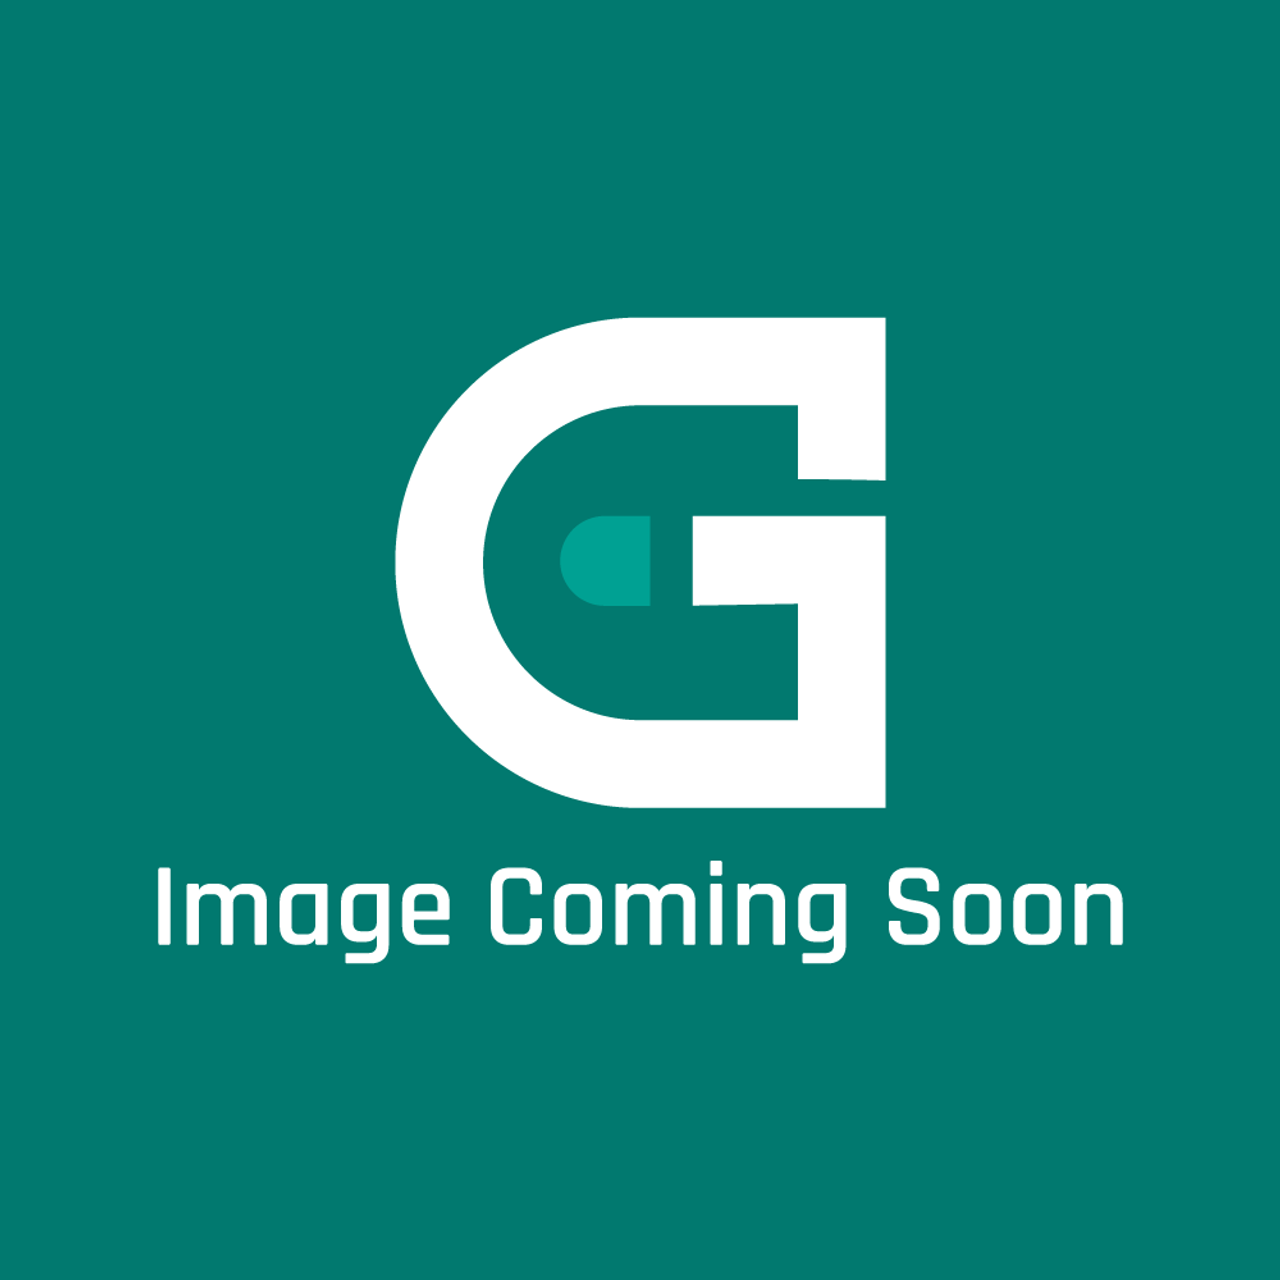 AGA Marvel 42247220 - S/A-Grommet G3087 (41002241) - Image Coming Soon!